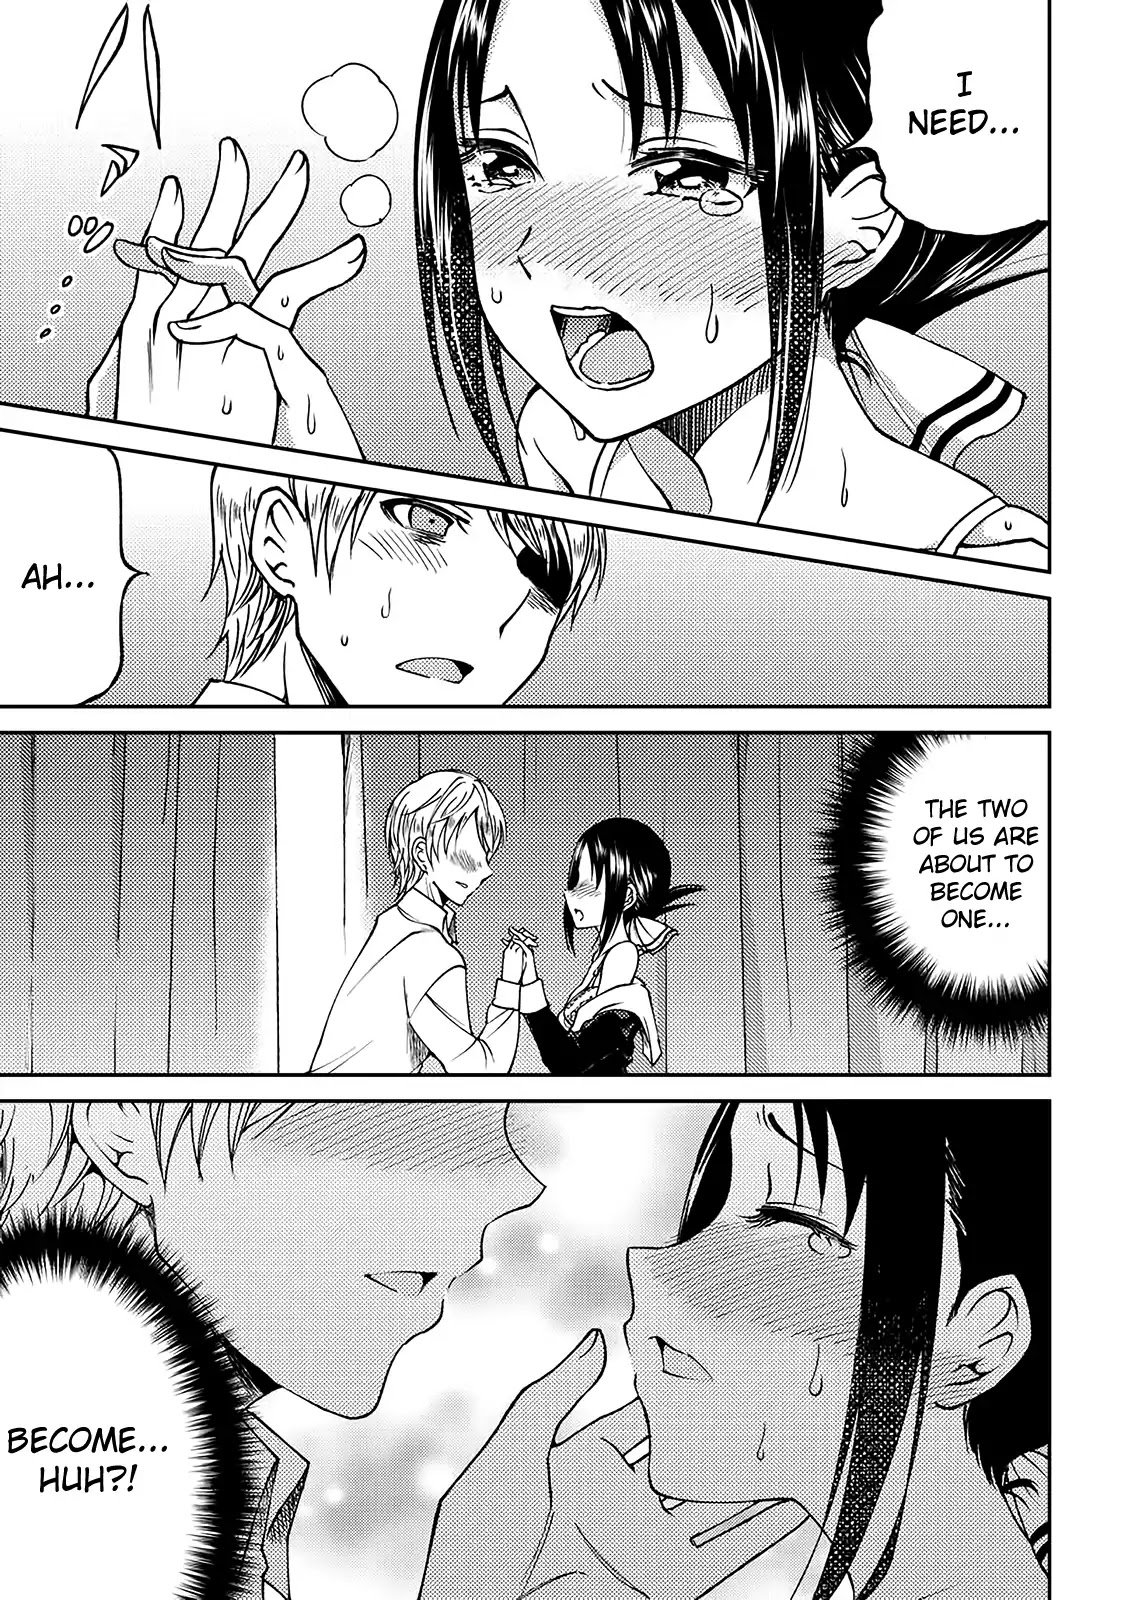 kaguya-wants-to-be-confessed-to-official-doujin-chap-3-18